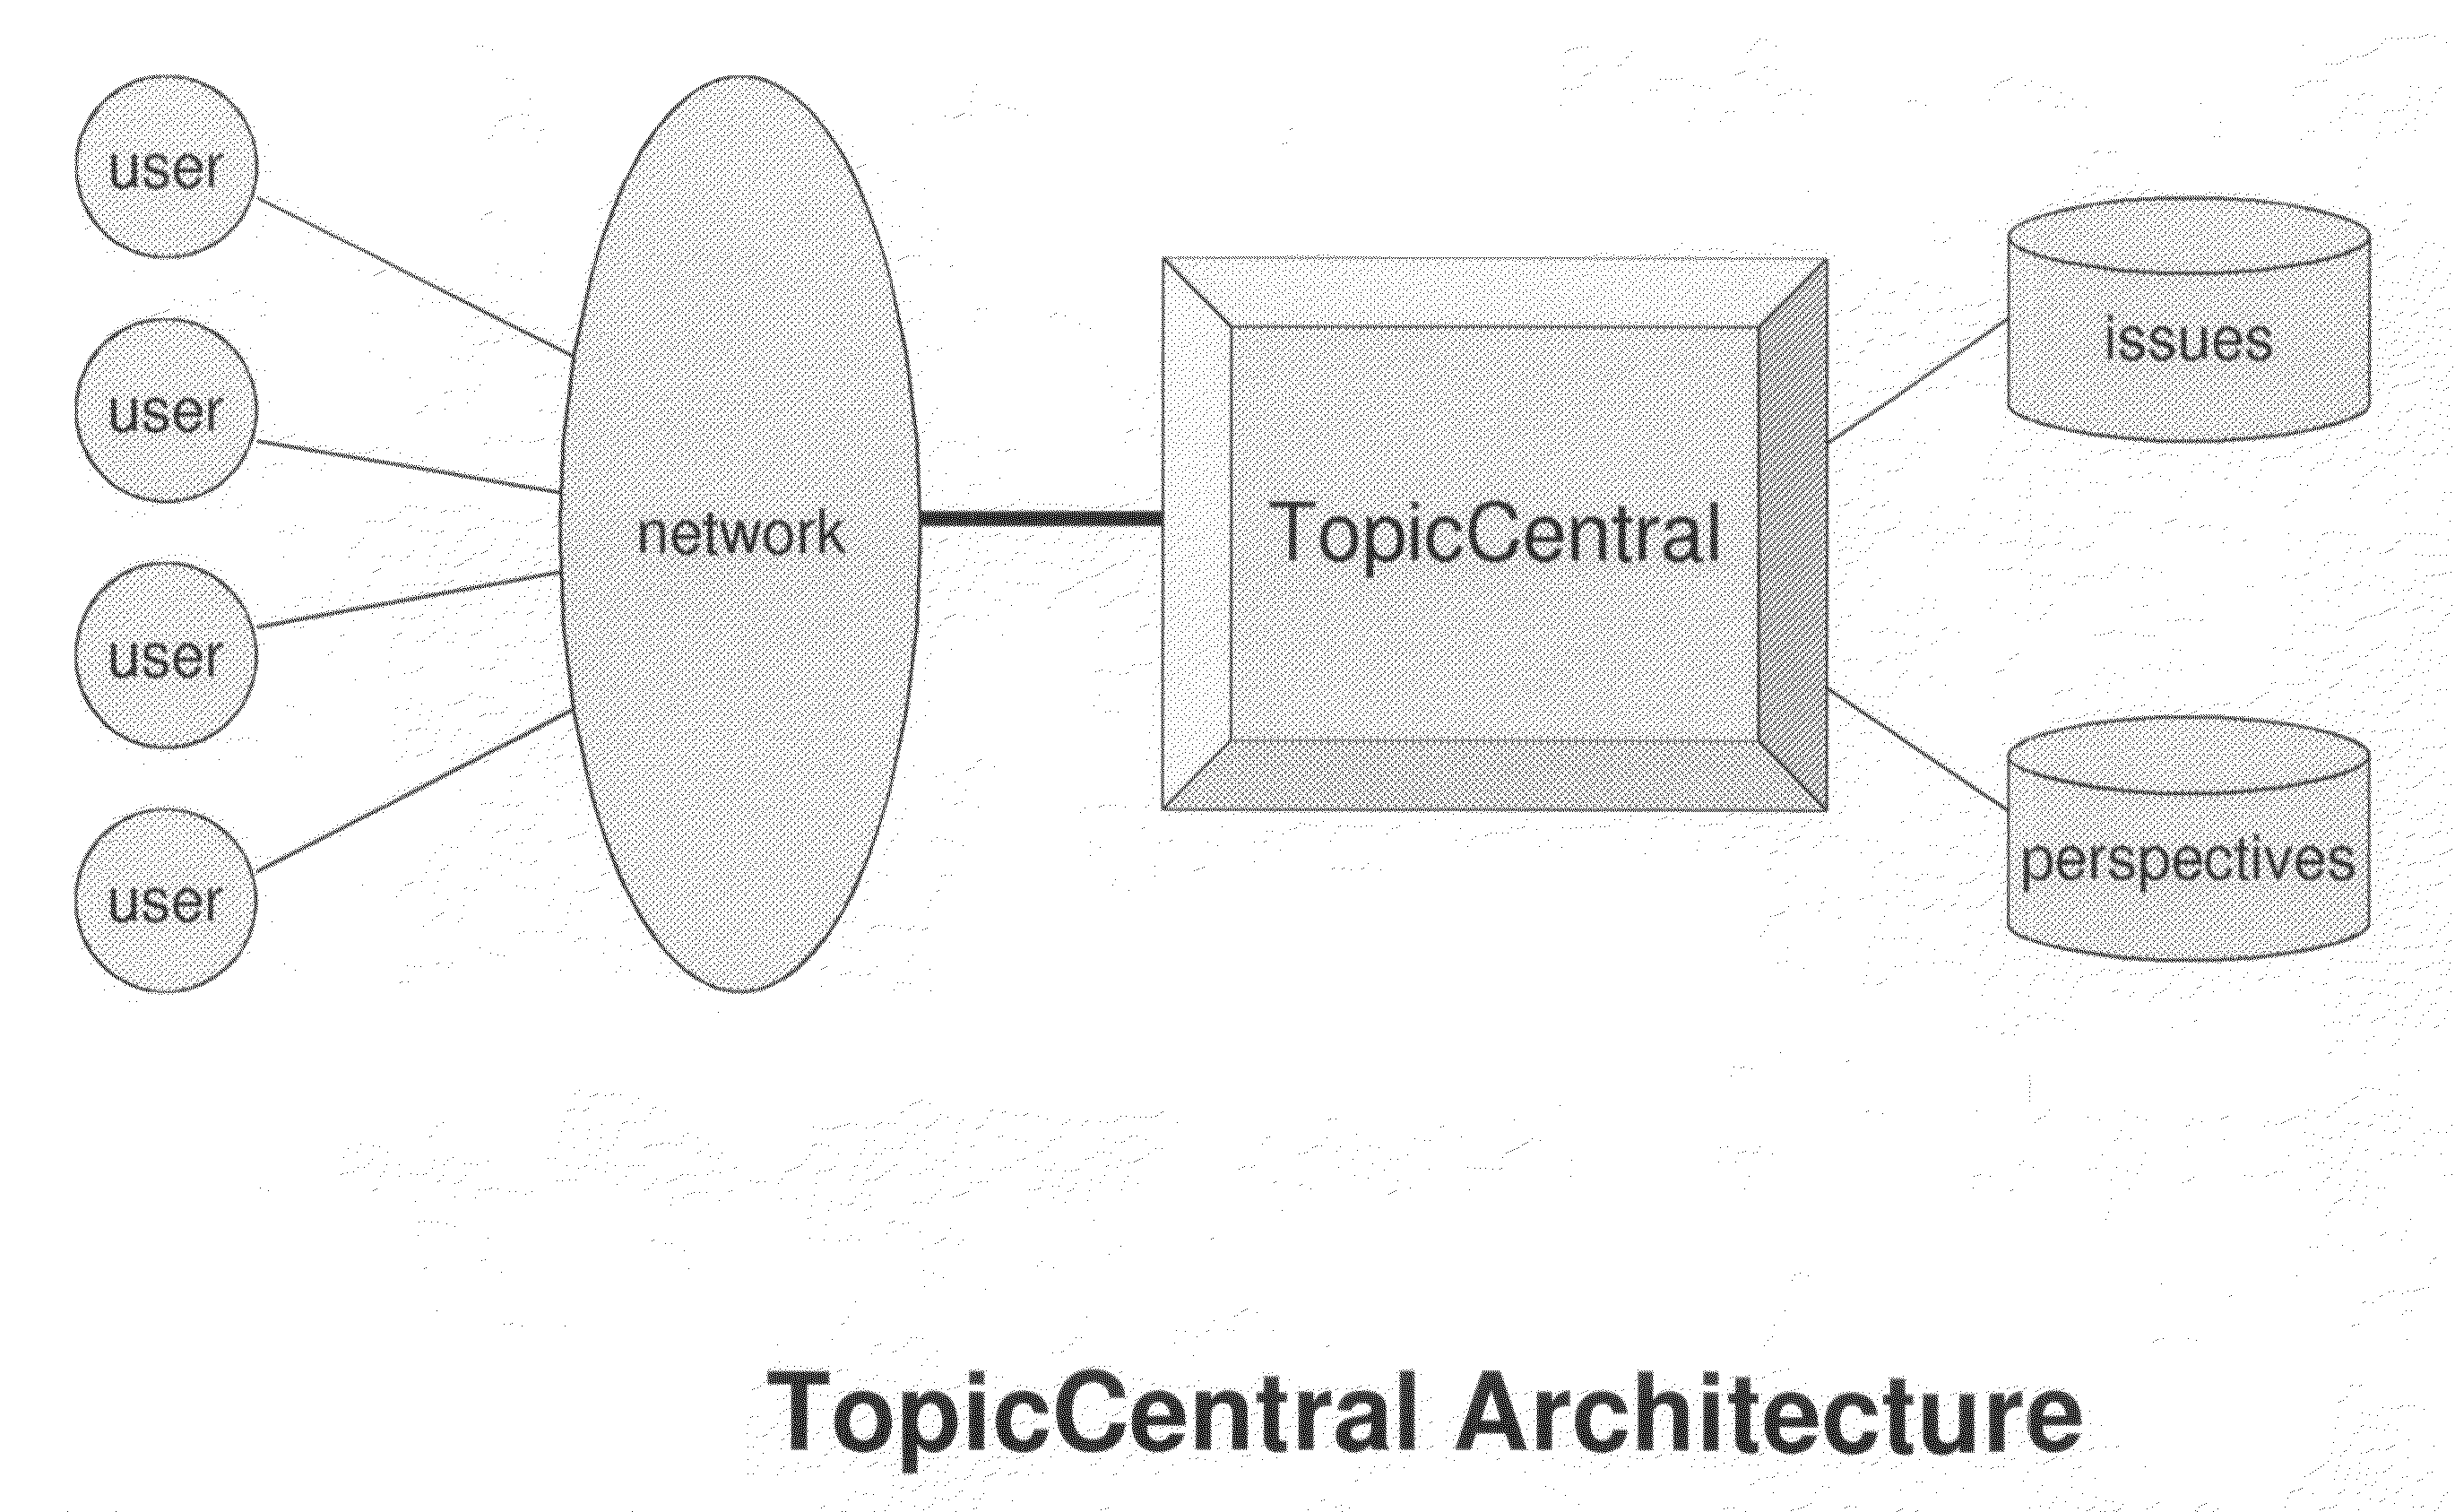 System and method for organizing and evaluating different points of view on controversial topics